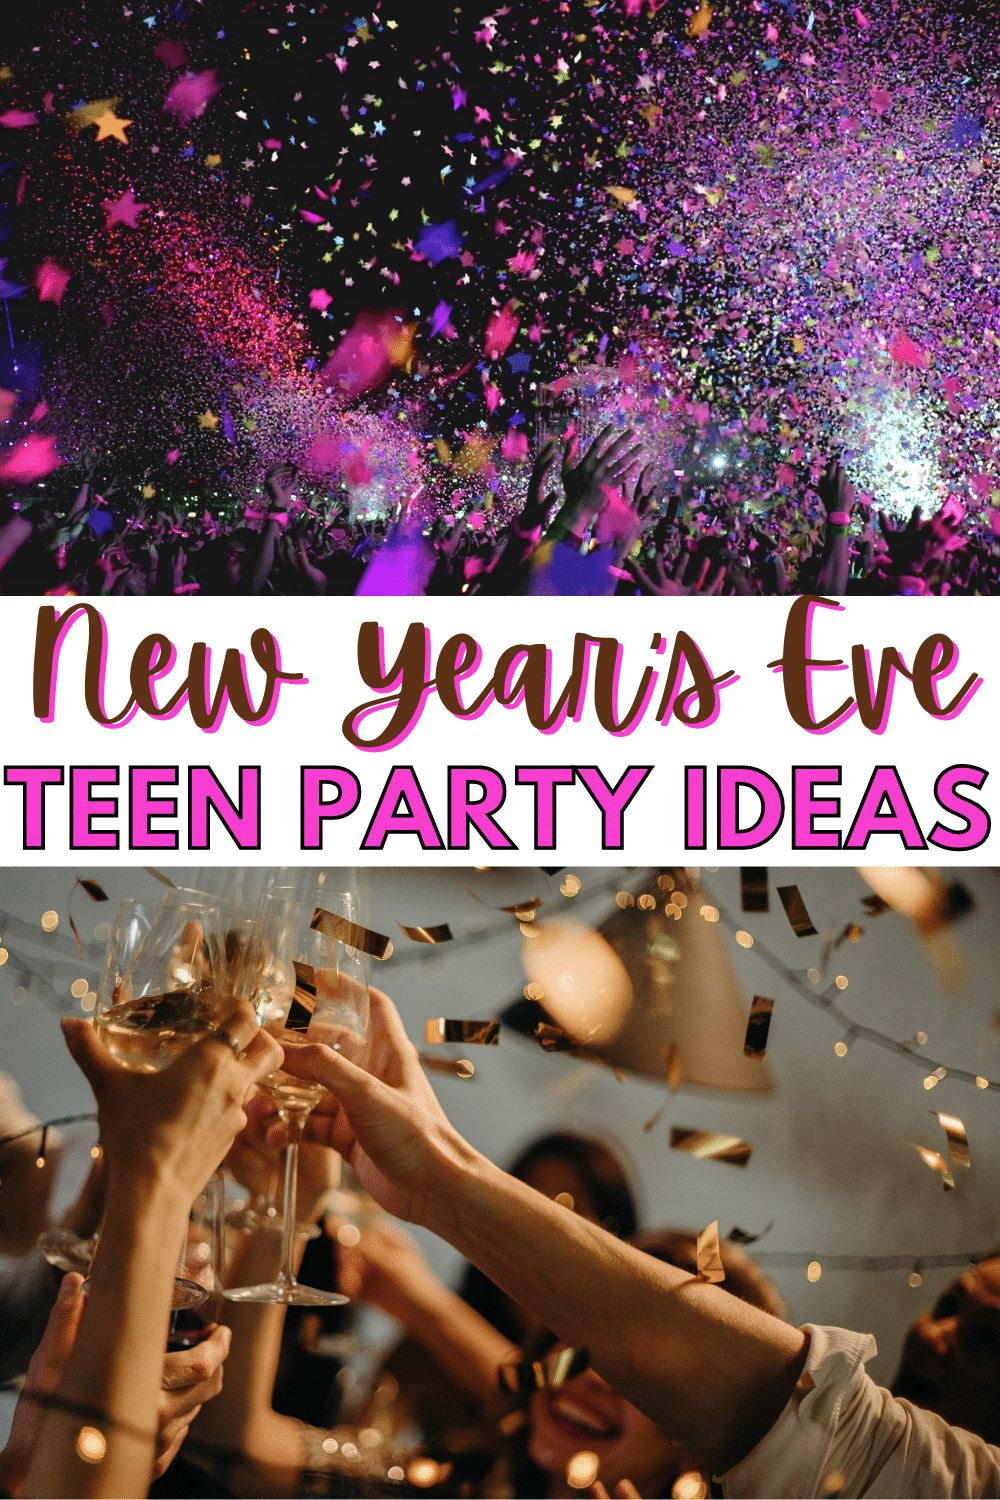 New Year's Eve Party Ideas for Teens developed with the help of teens, including food, entertainment, decorations and even some extra ideas. #newyearseve #teenagers #teens #party via @wondermomwannab